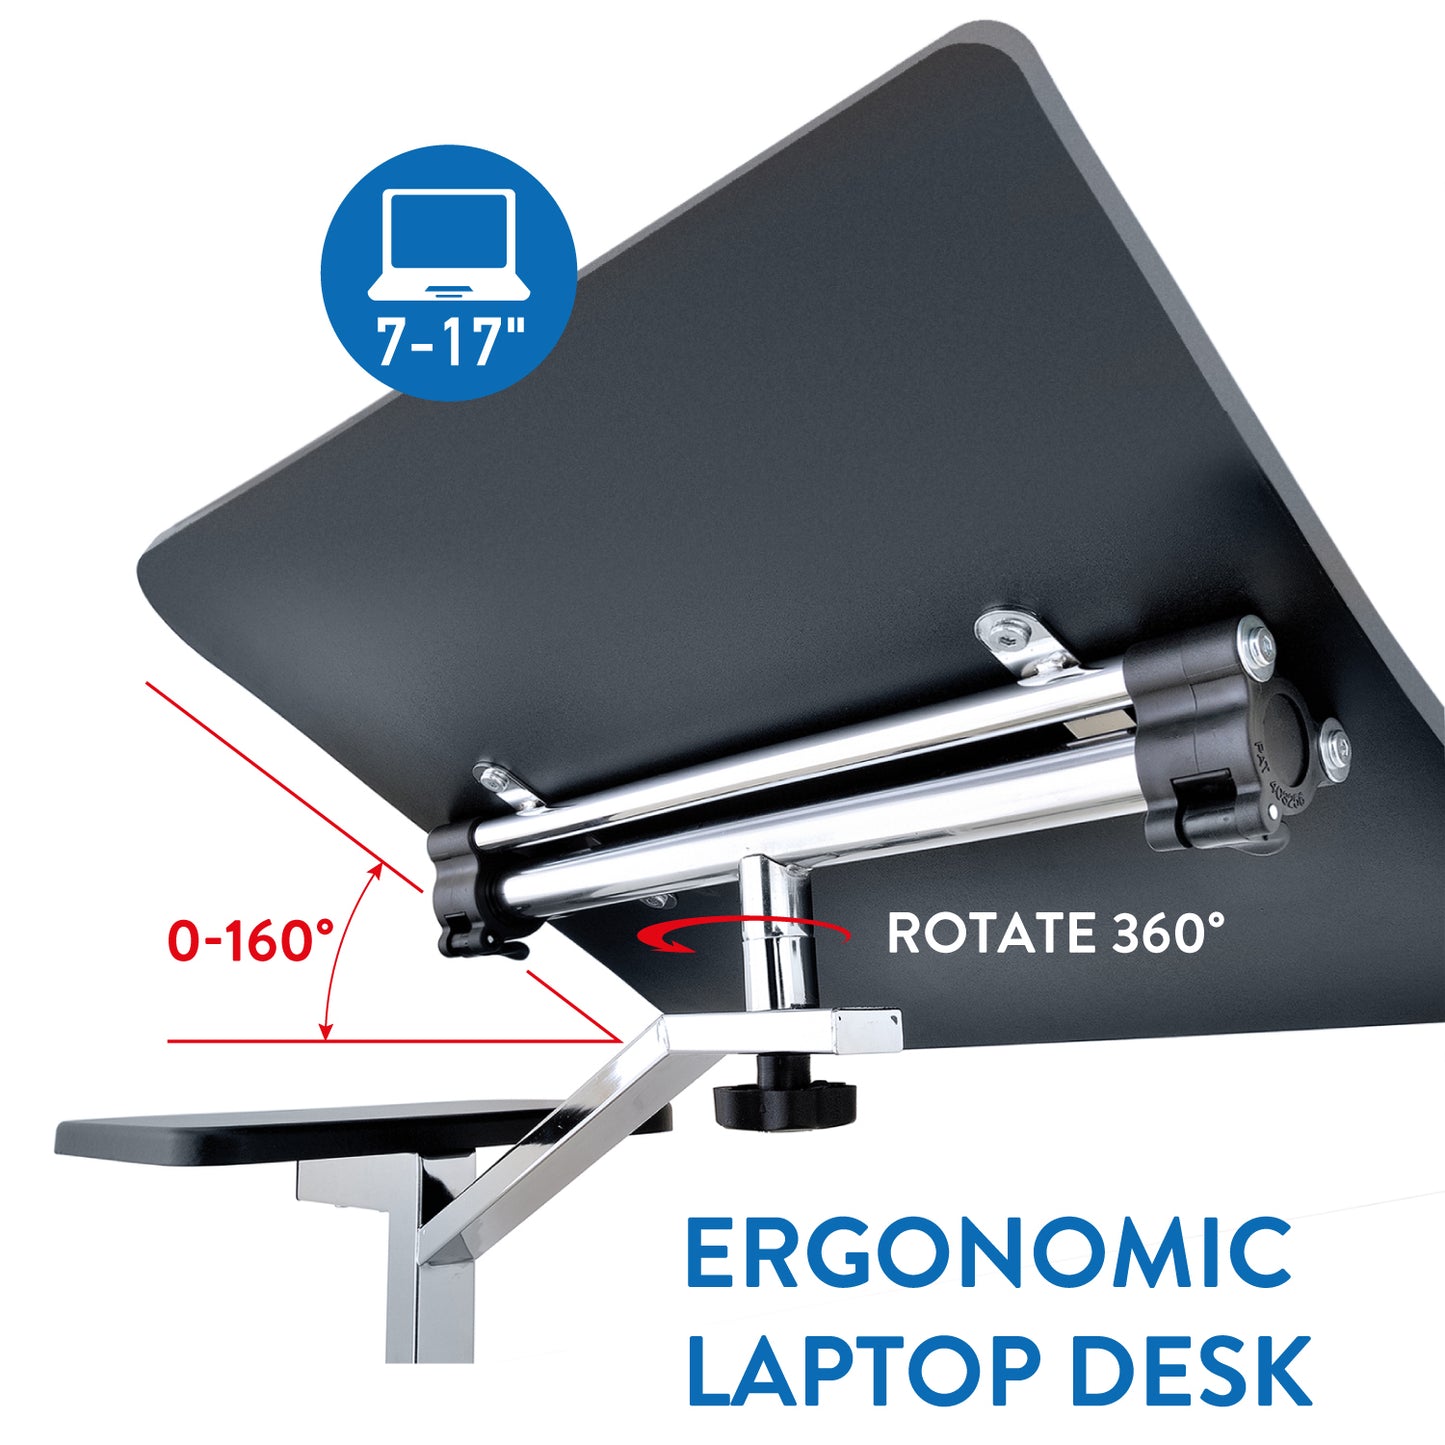 High Quality Laptop Stand with Comfortable Position Adjustments